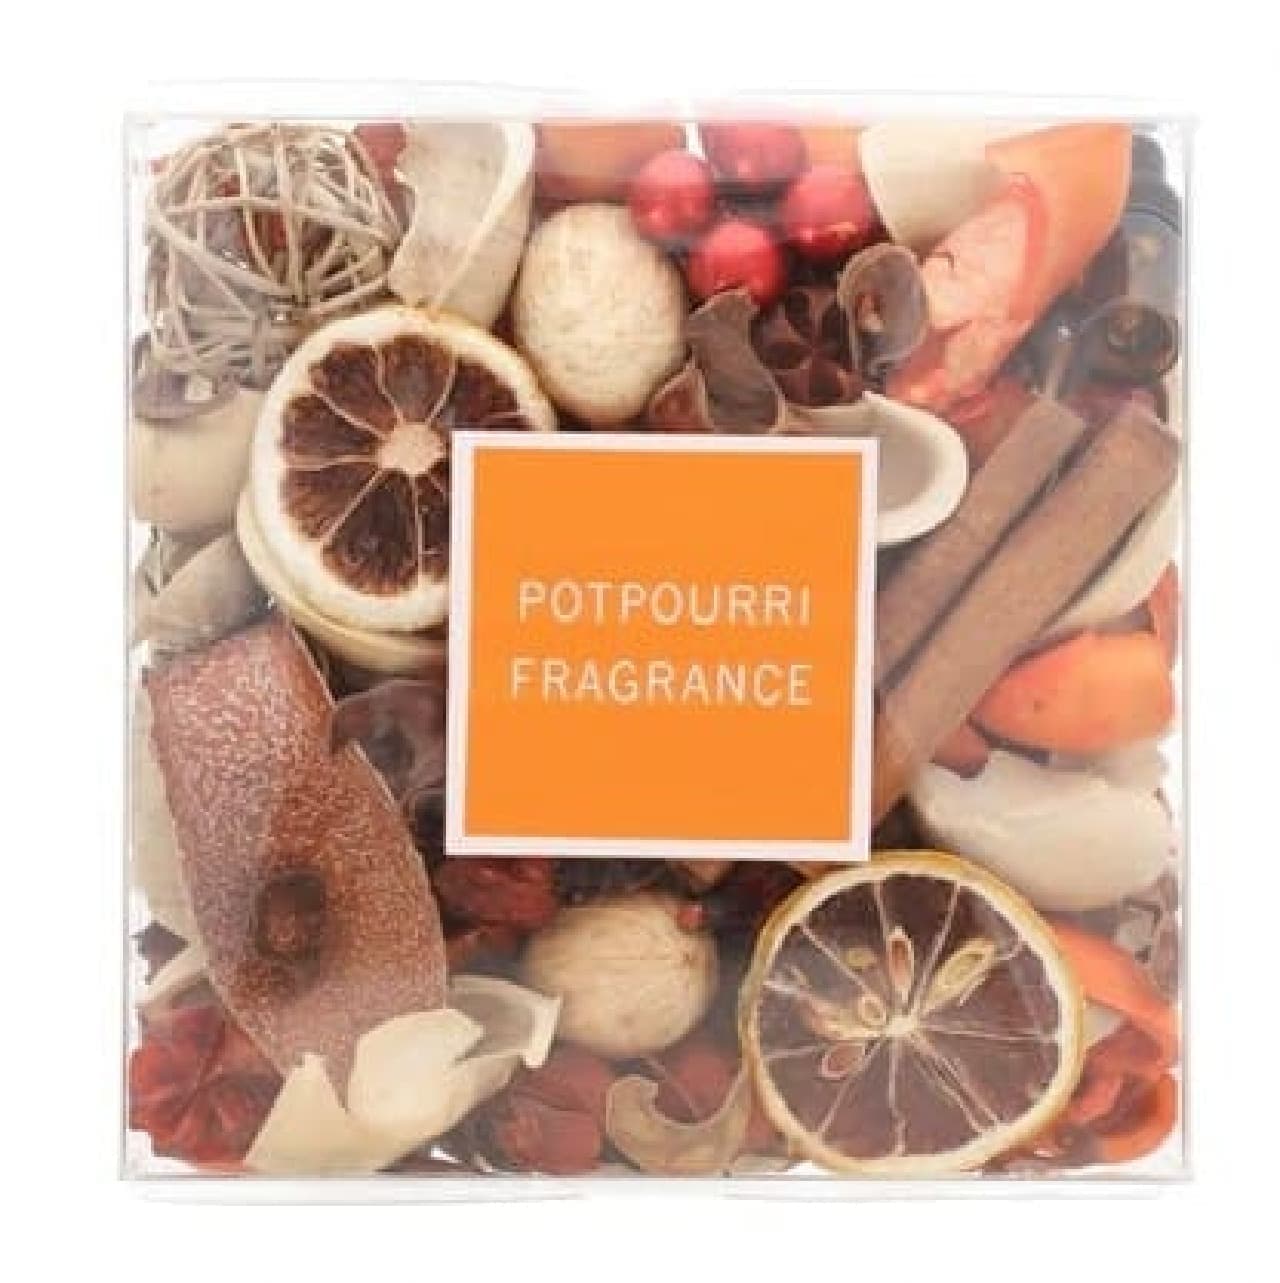 Potpourri Pure Faure with oil